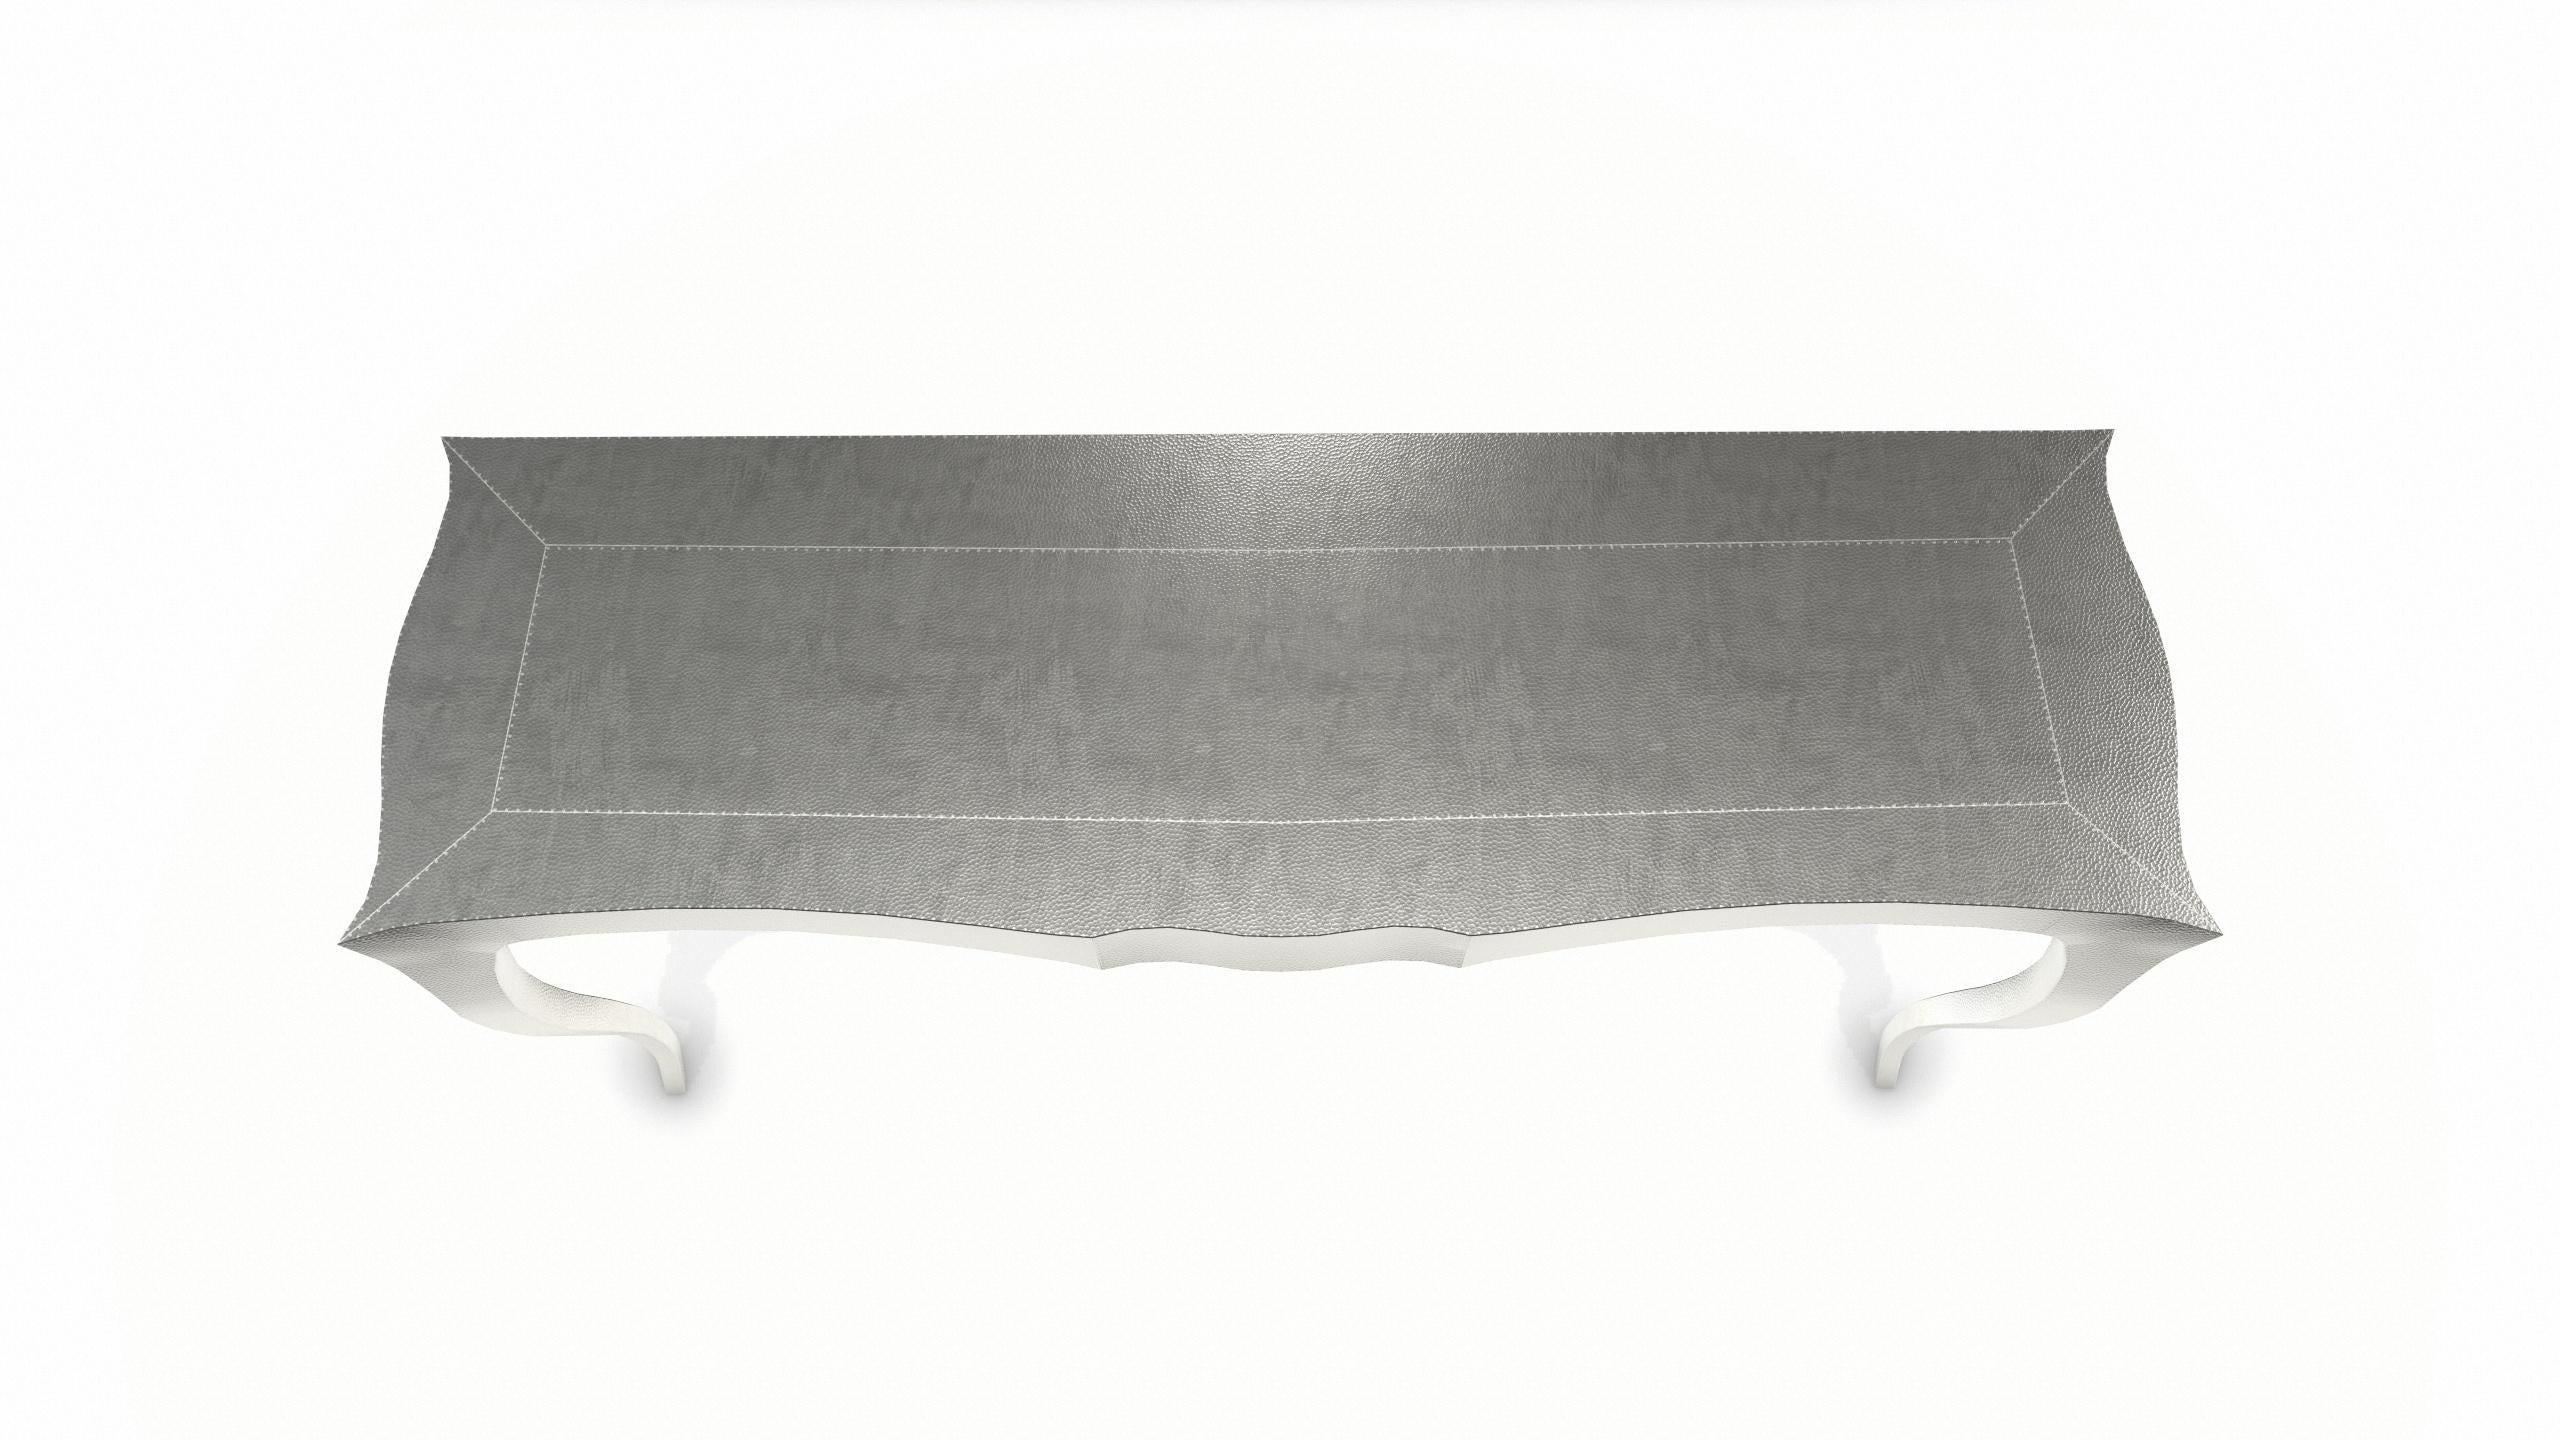 Metal Louise Console Art Deco Side Tables Mid. Hammered White Bronze by Paul Mathieu For Sale